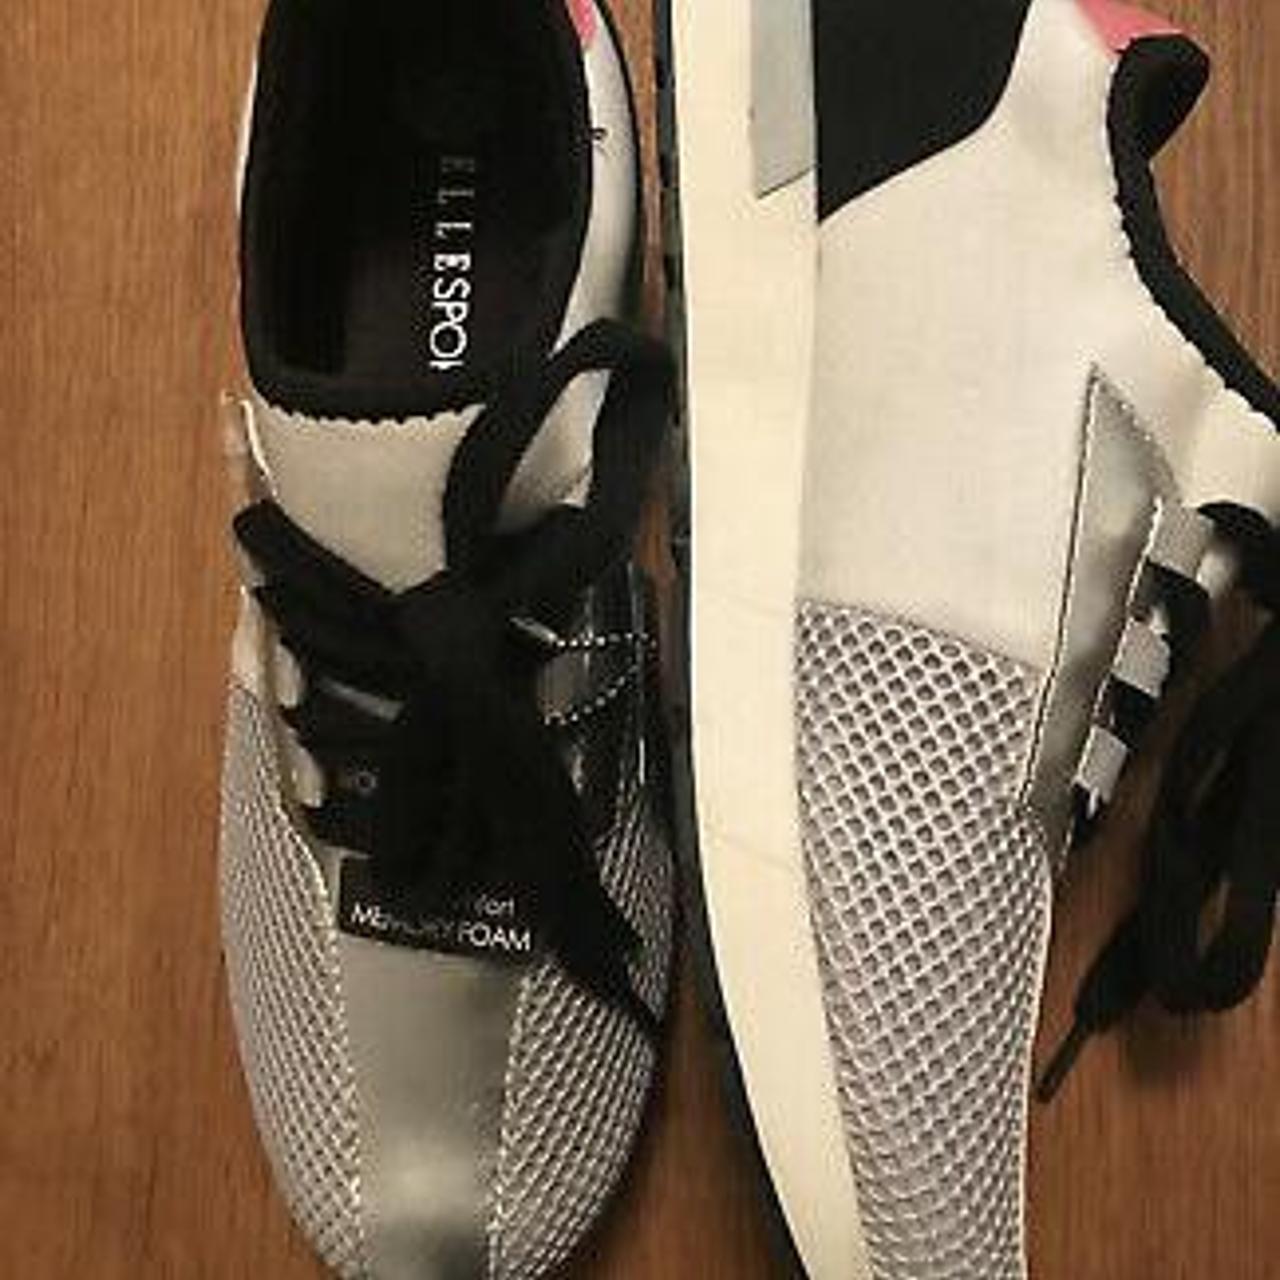 Elle sport White trainers size 4.